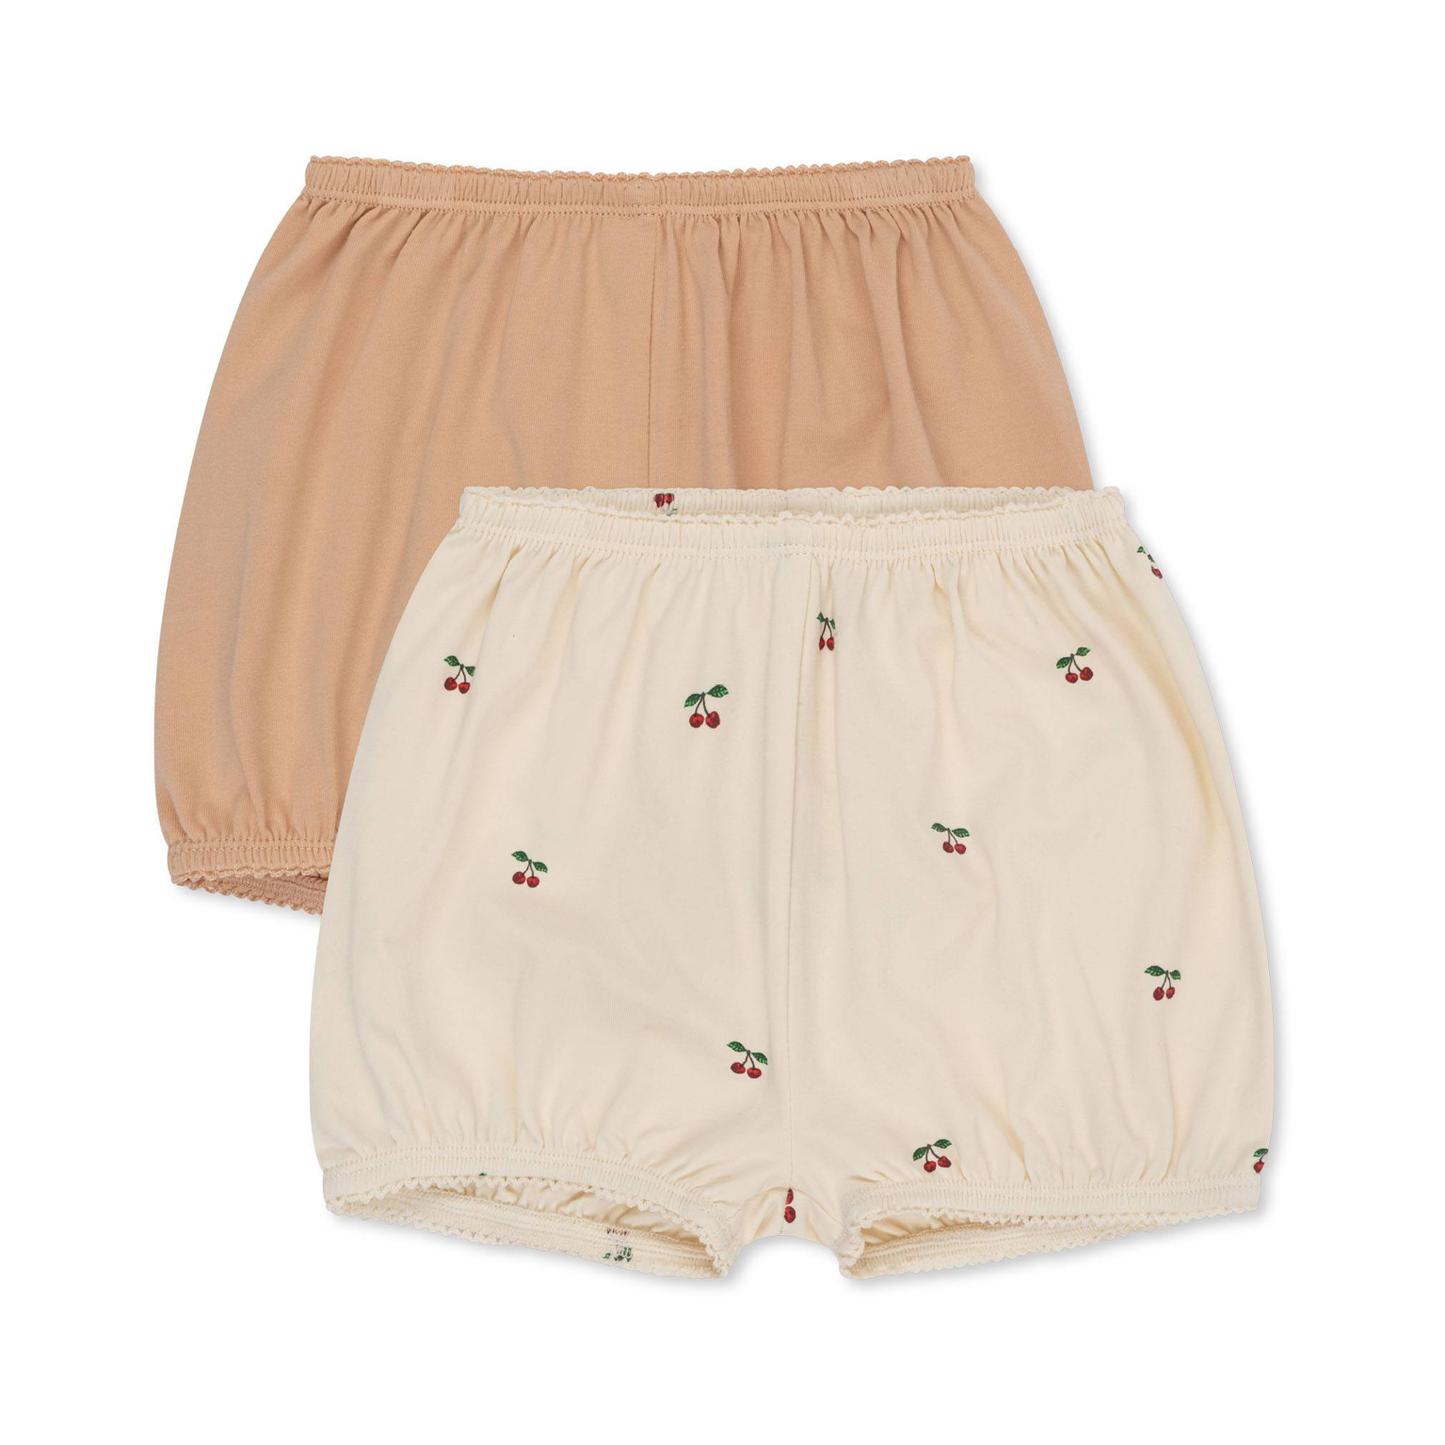 2er Pack Bloomers - Cherry/Toasted Almond